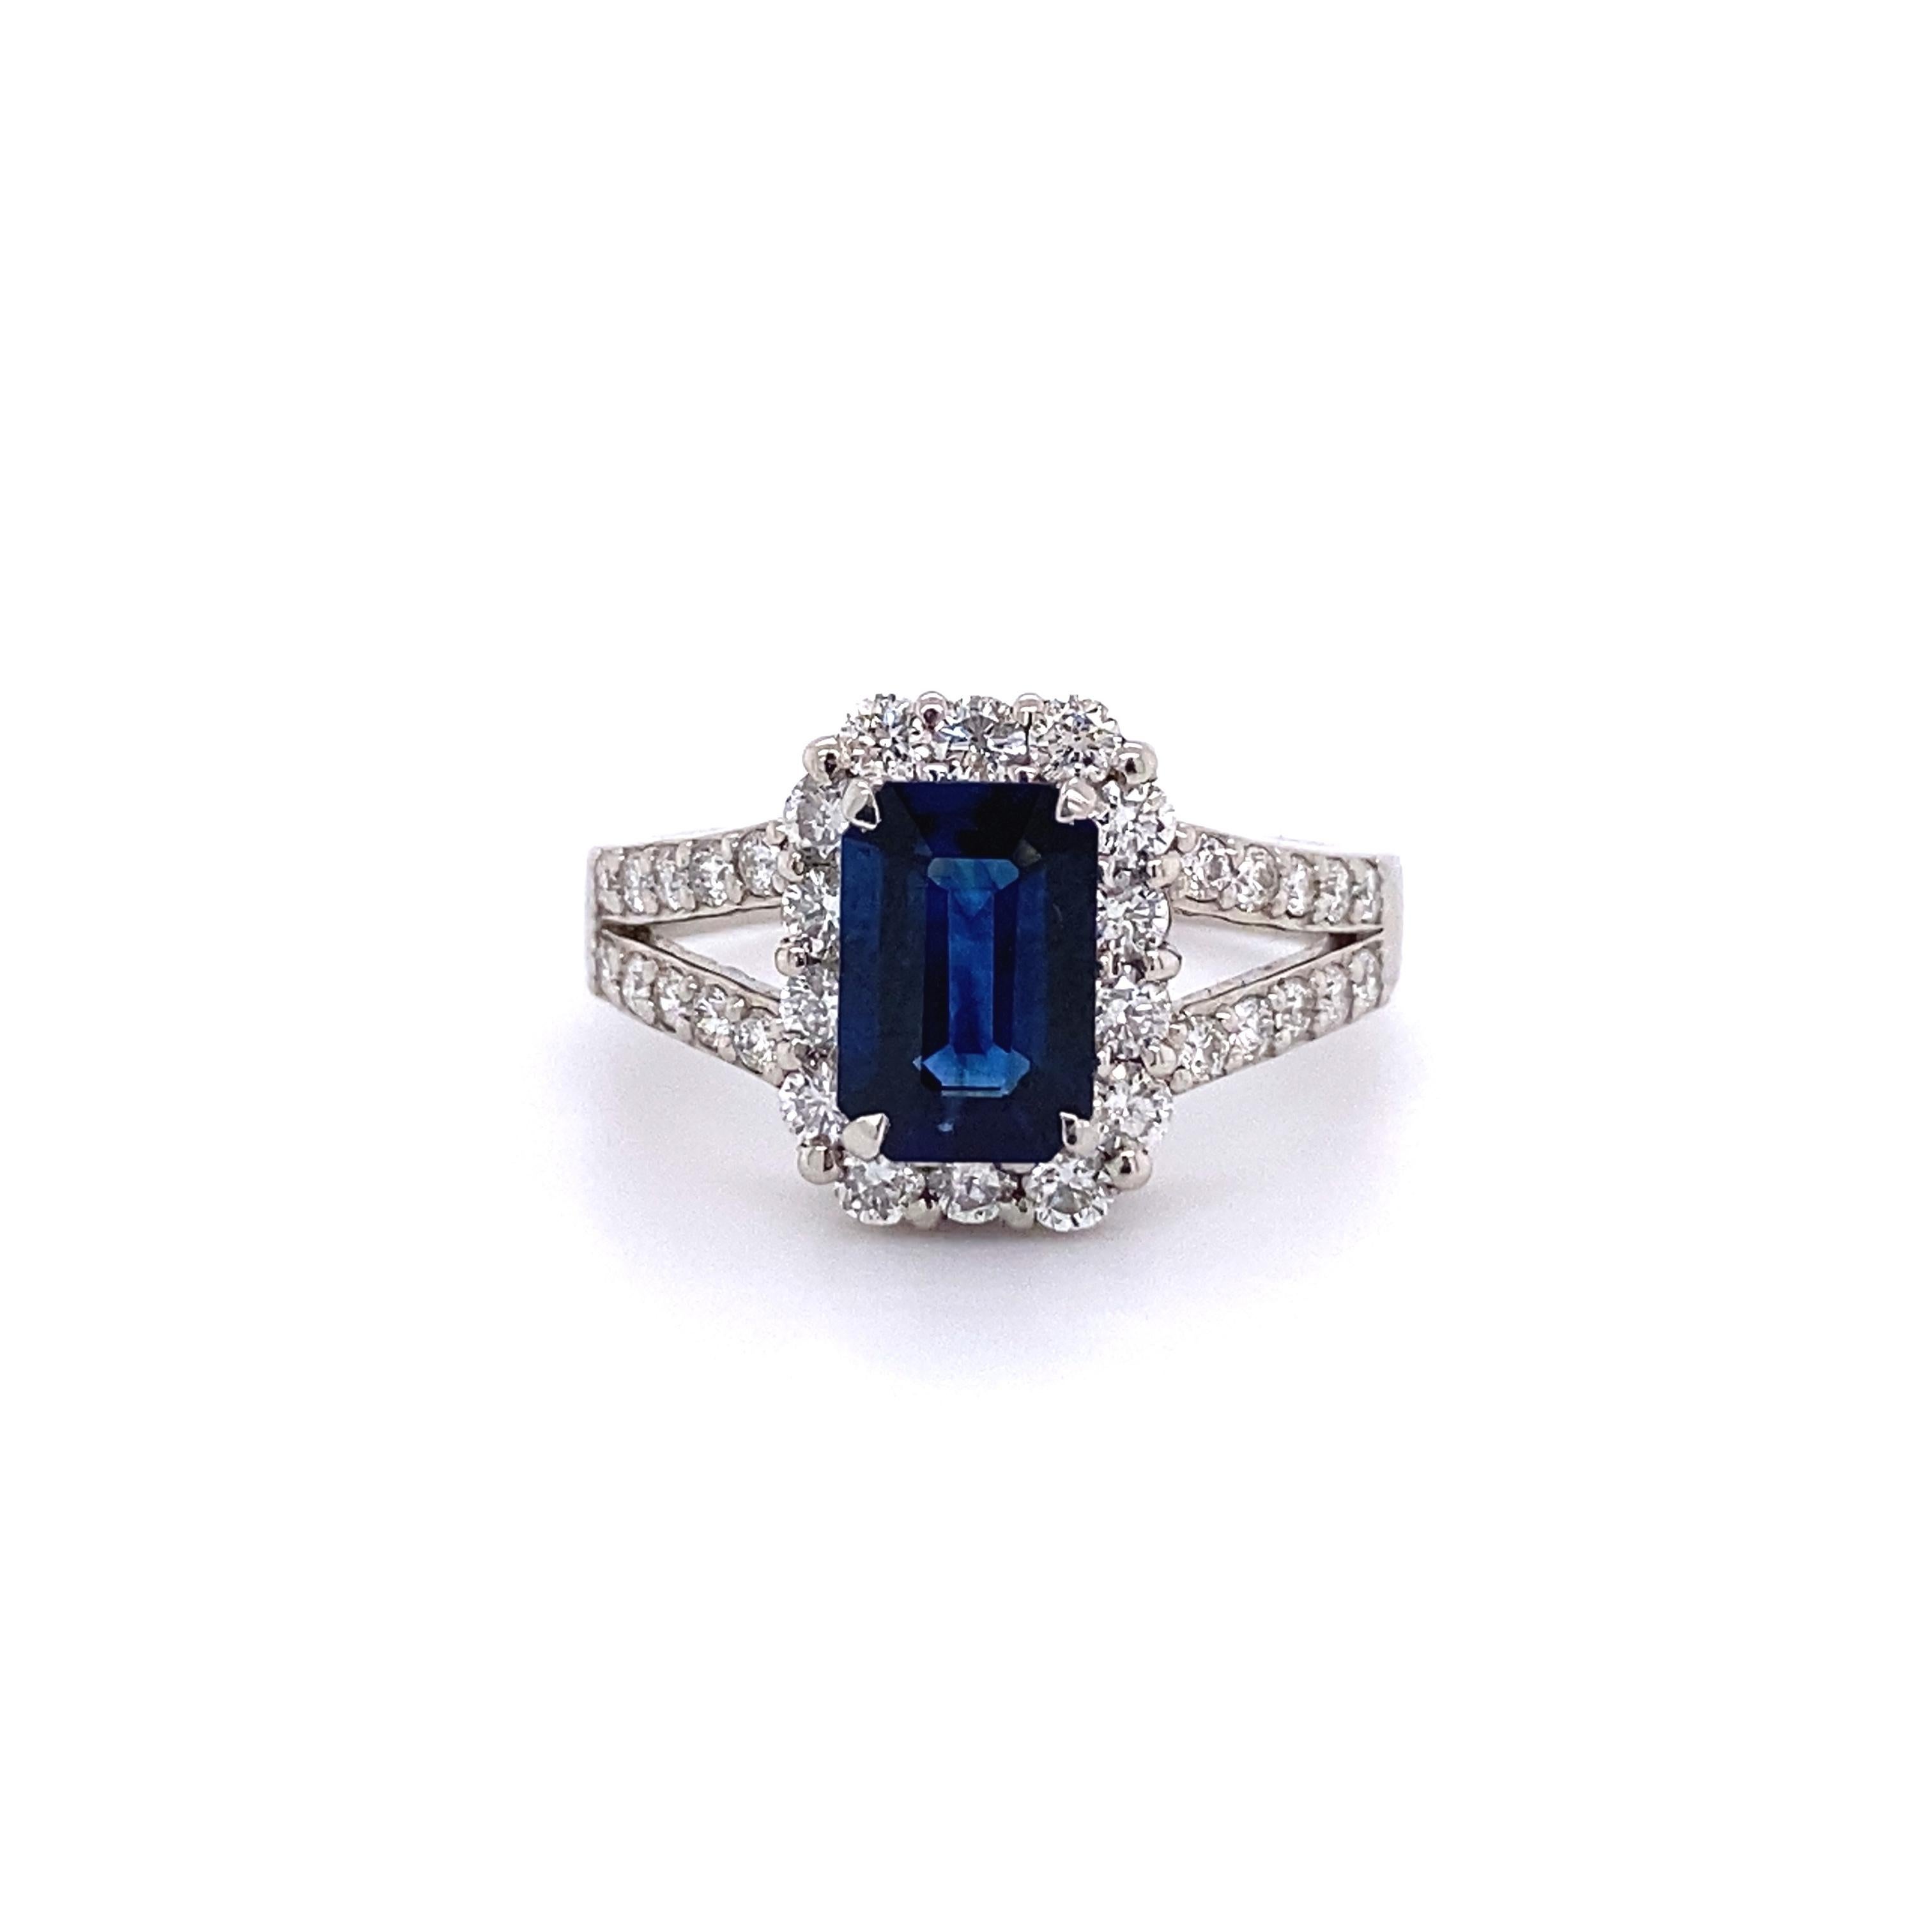 Emerald Cut Blue Sapphire and Diamond Vintage Platinum Ring Estate Fine Jewelry In Excellent Condition For Sale In Montreal, QC